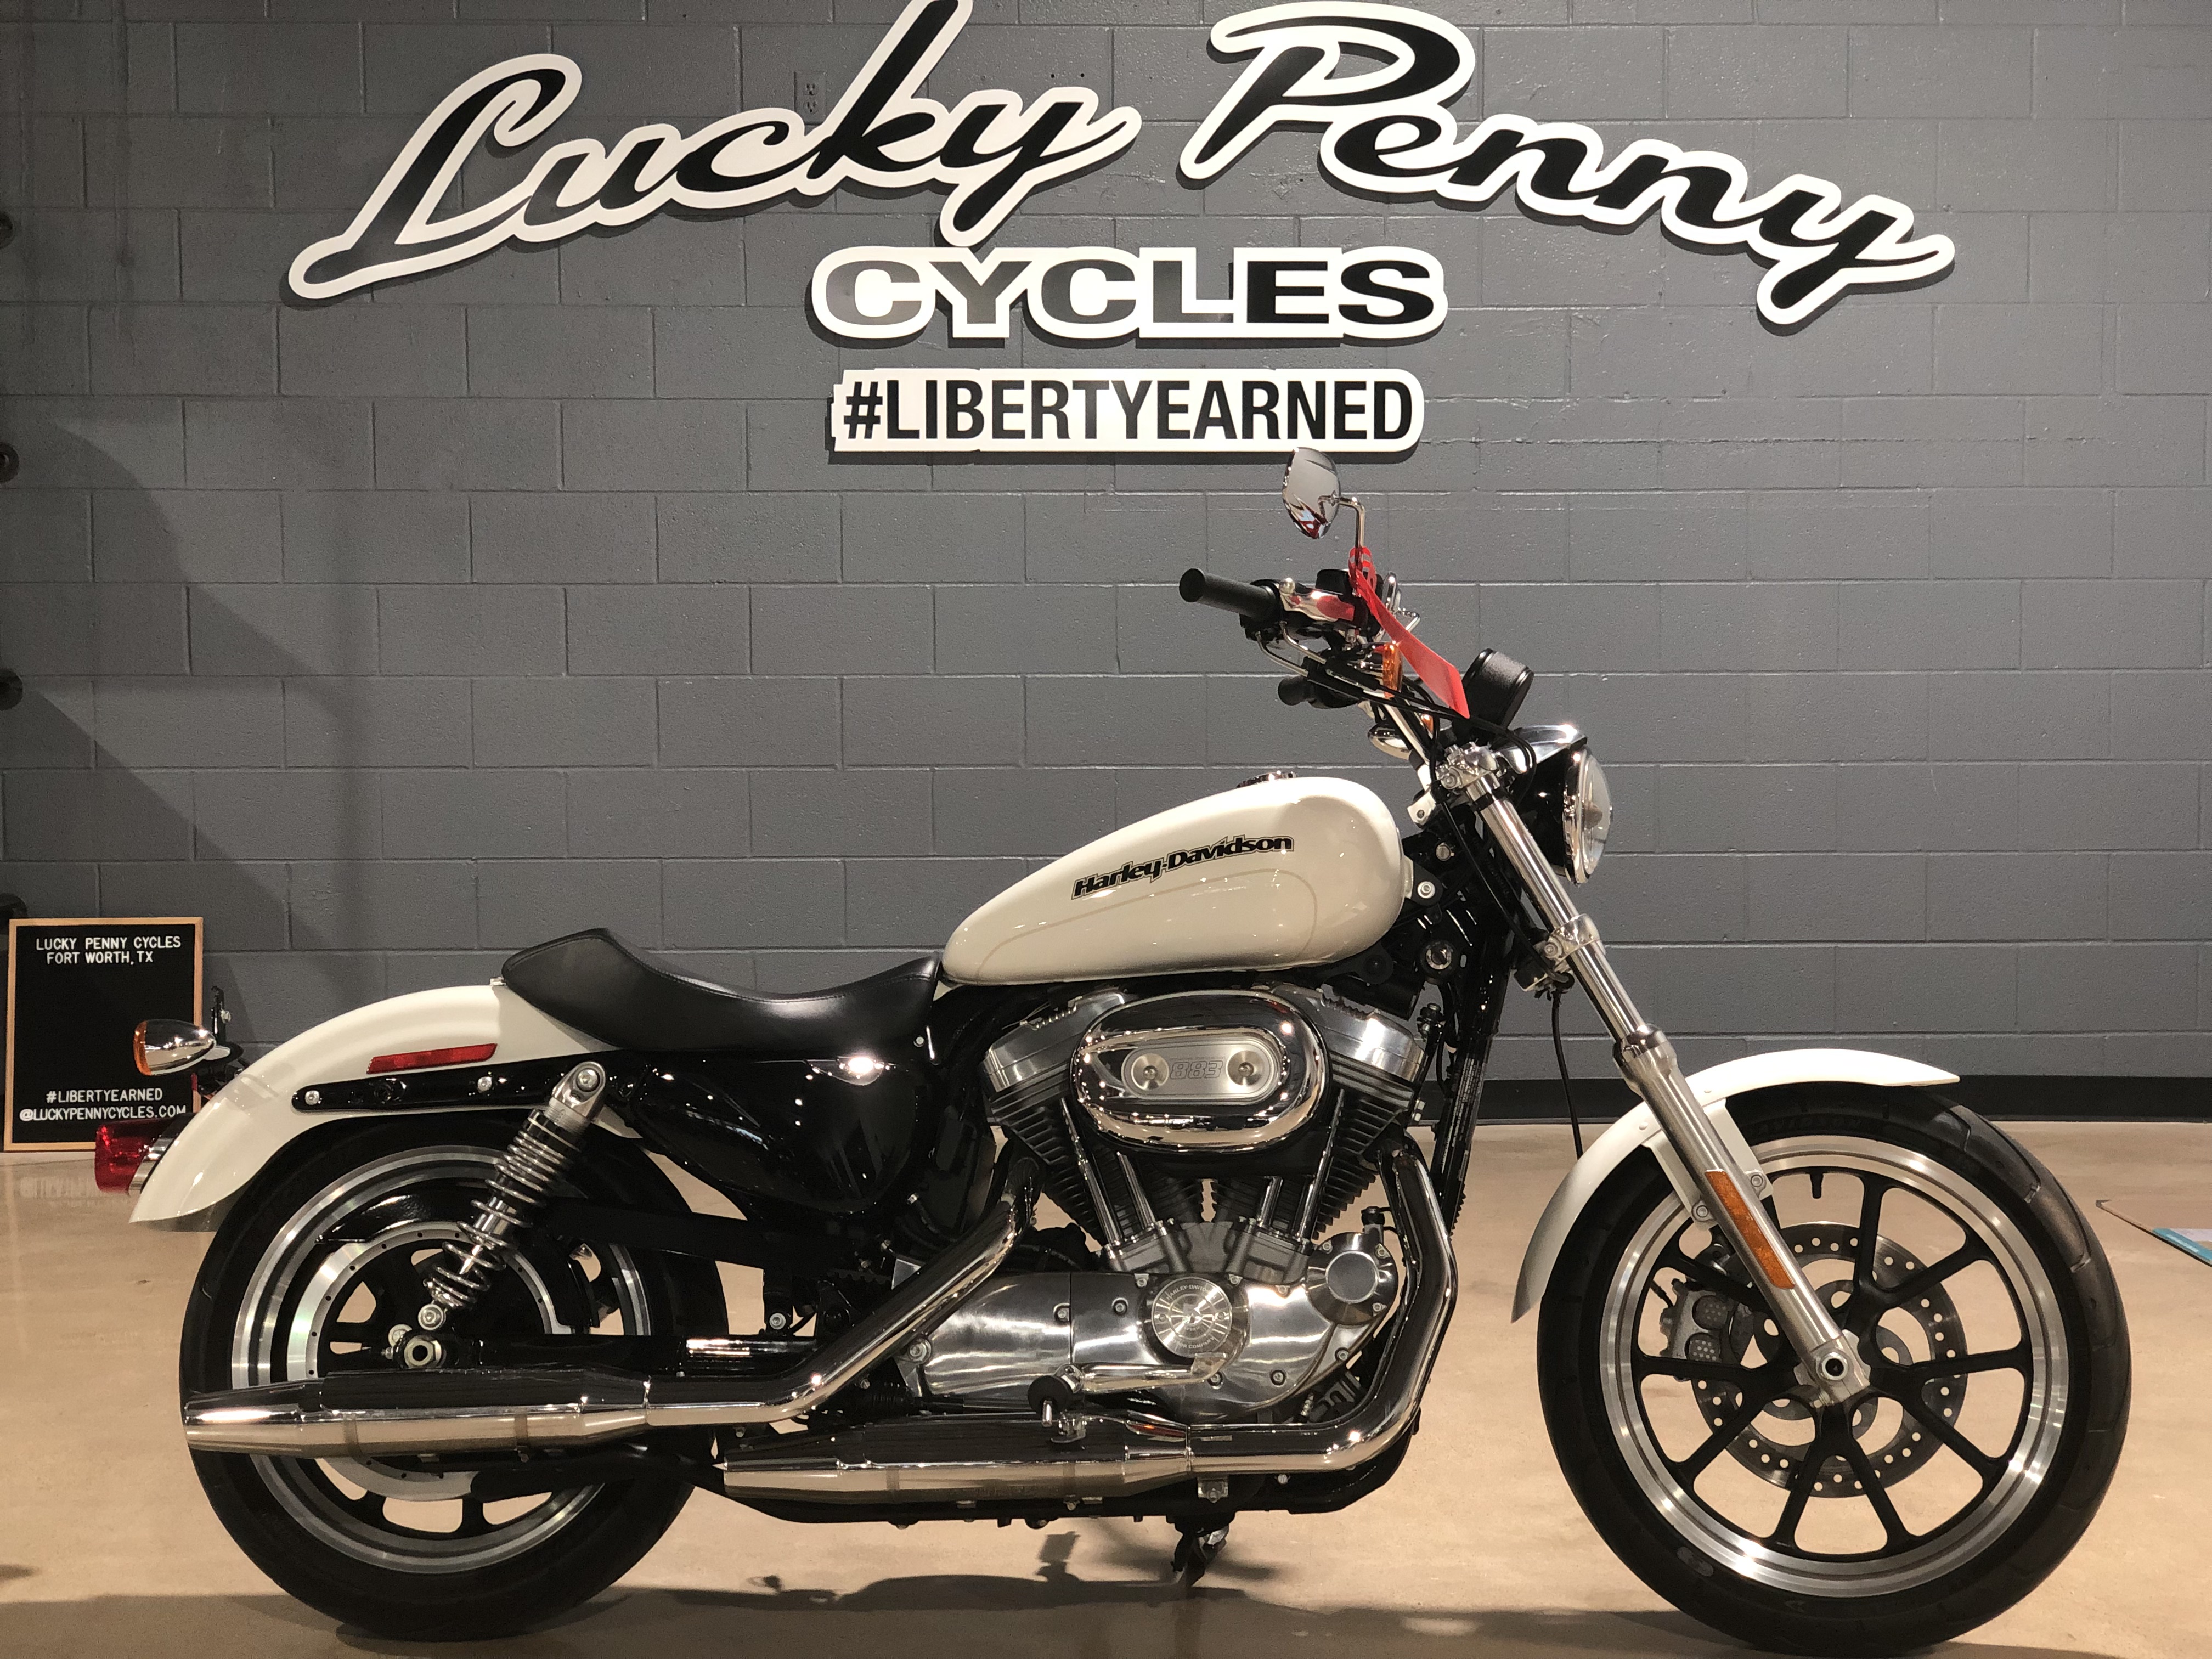 Pre-Owned 2018 Harley-Davidson Sportster SuperLow XL883L Cruiser in